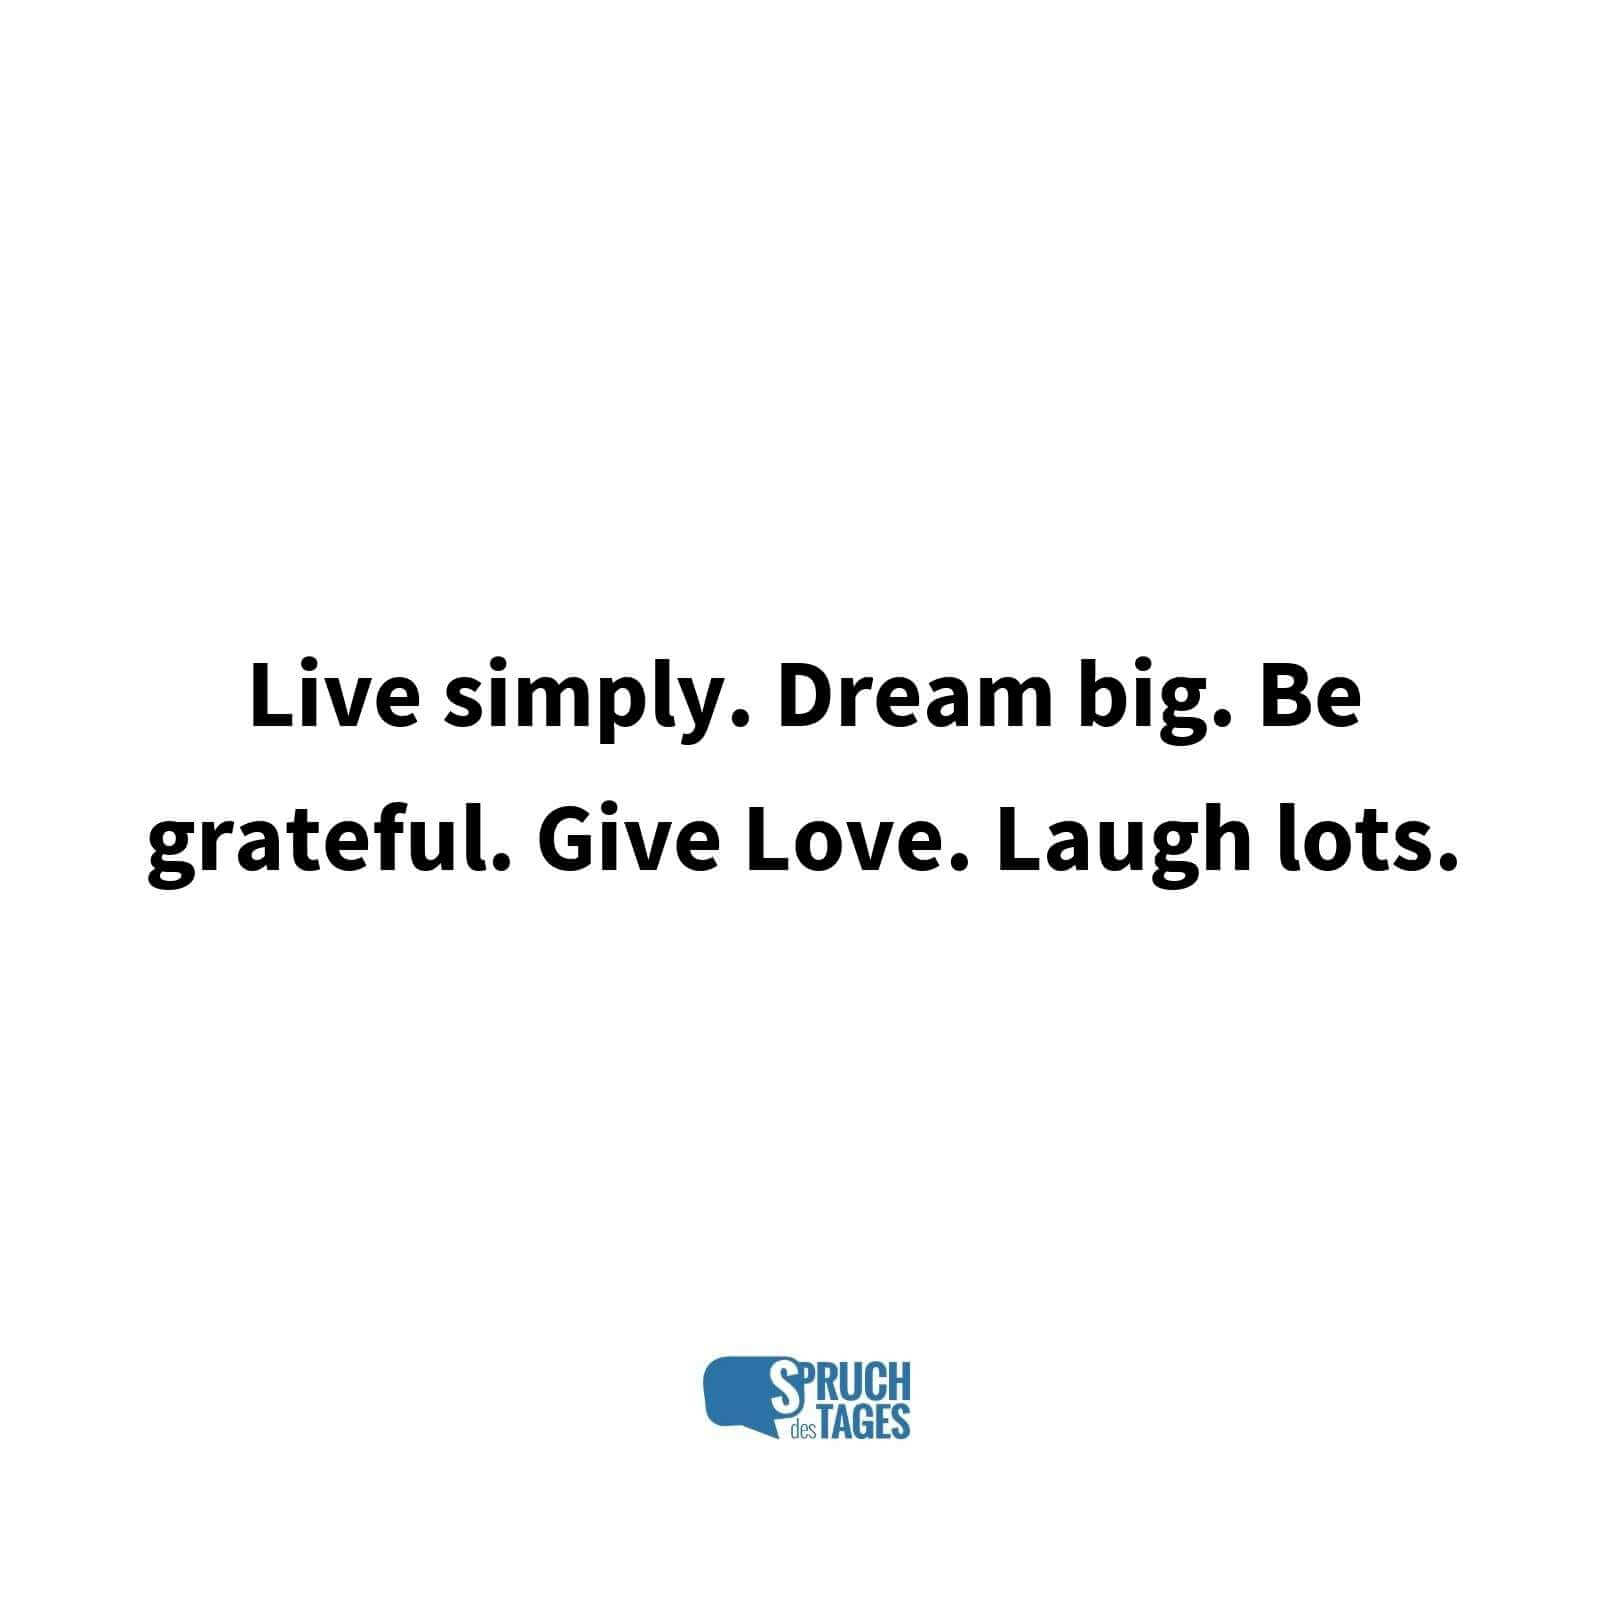 Live simply. Dream big. Be grateful. Give Love. Laugh lots.